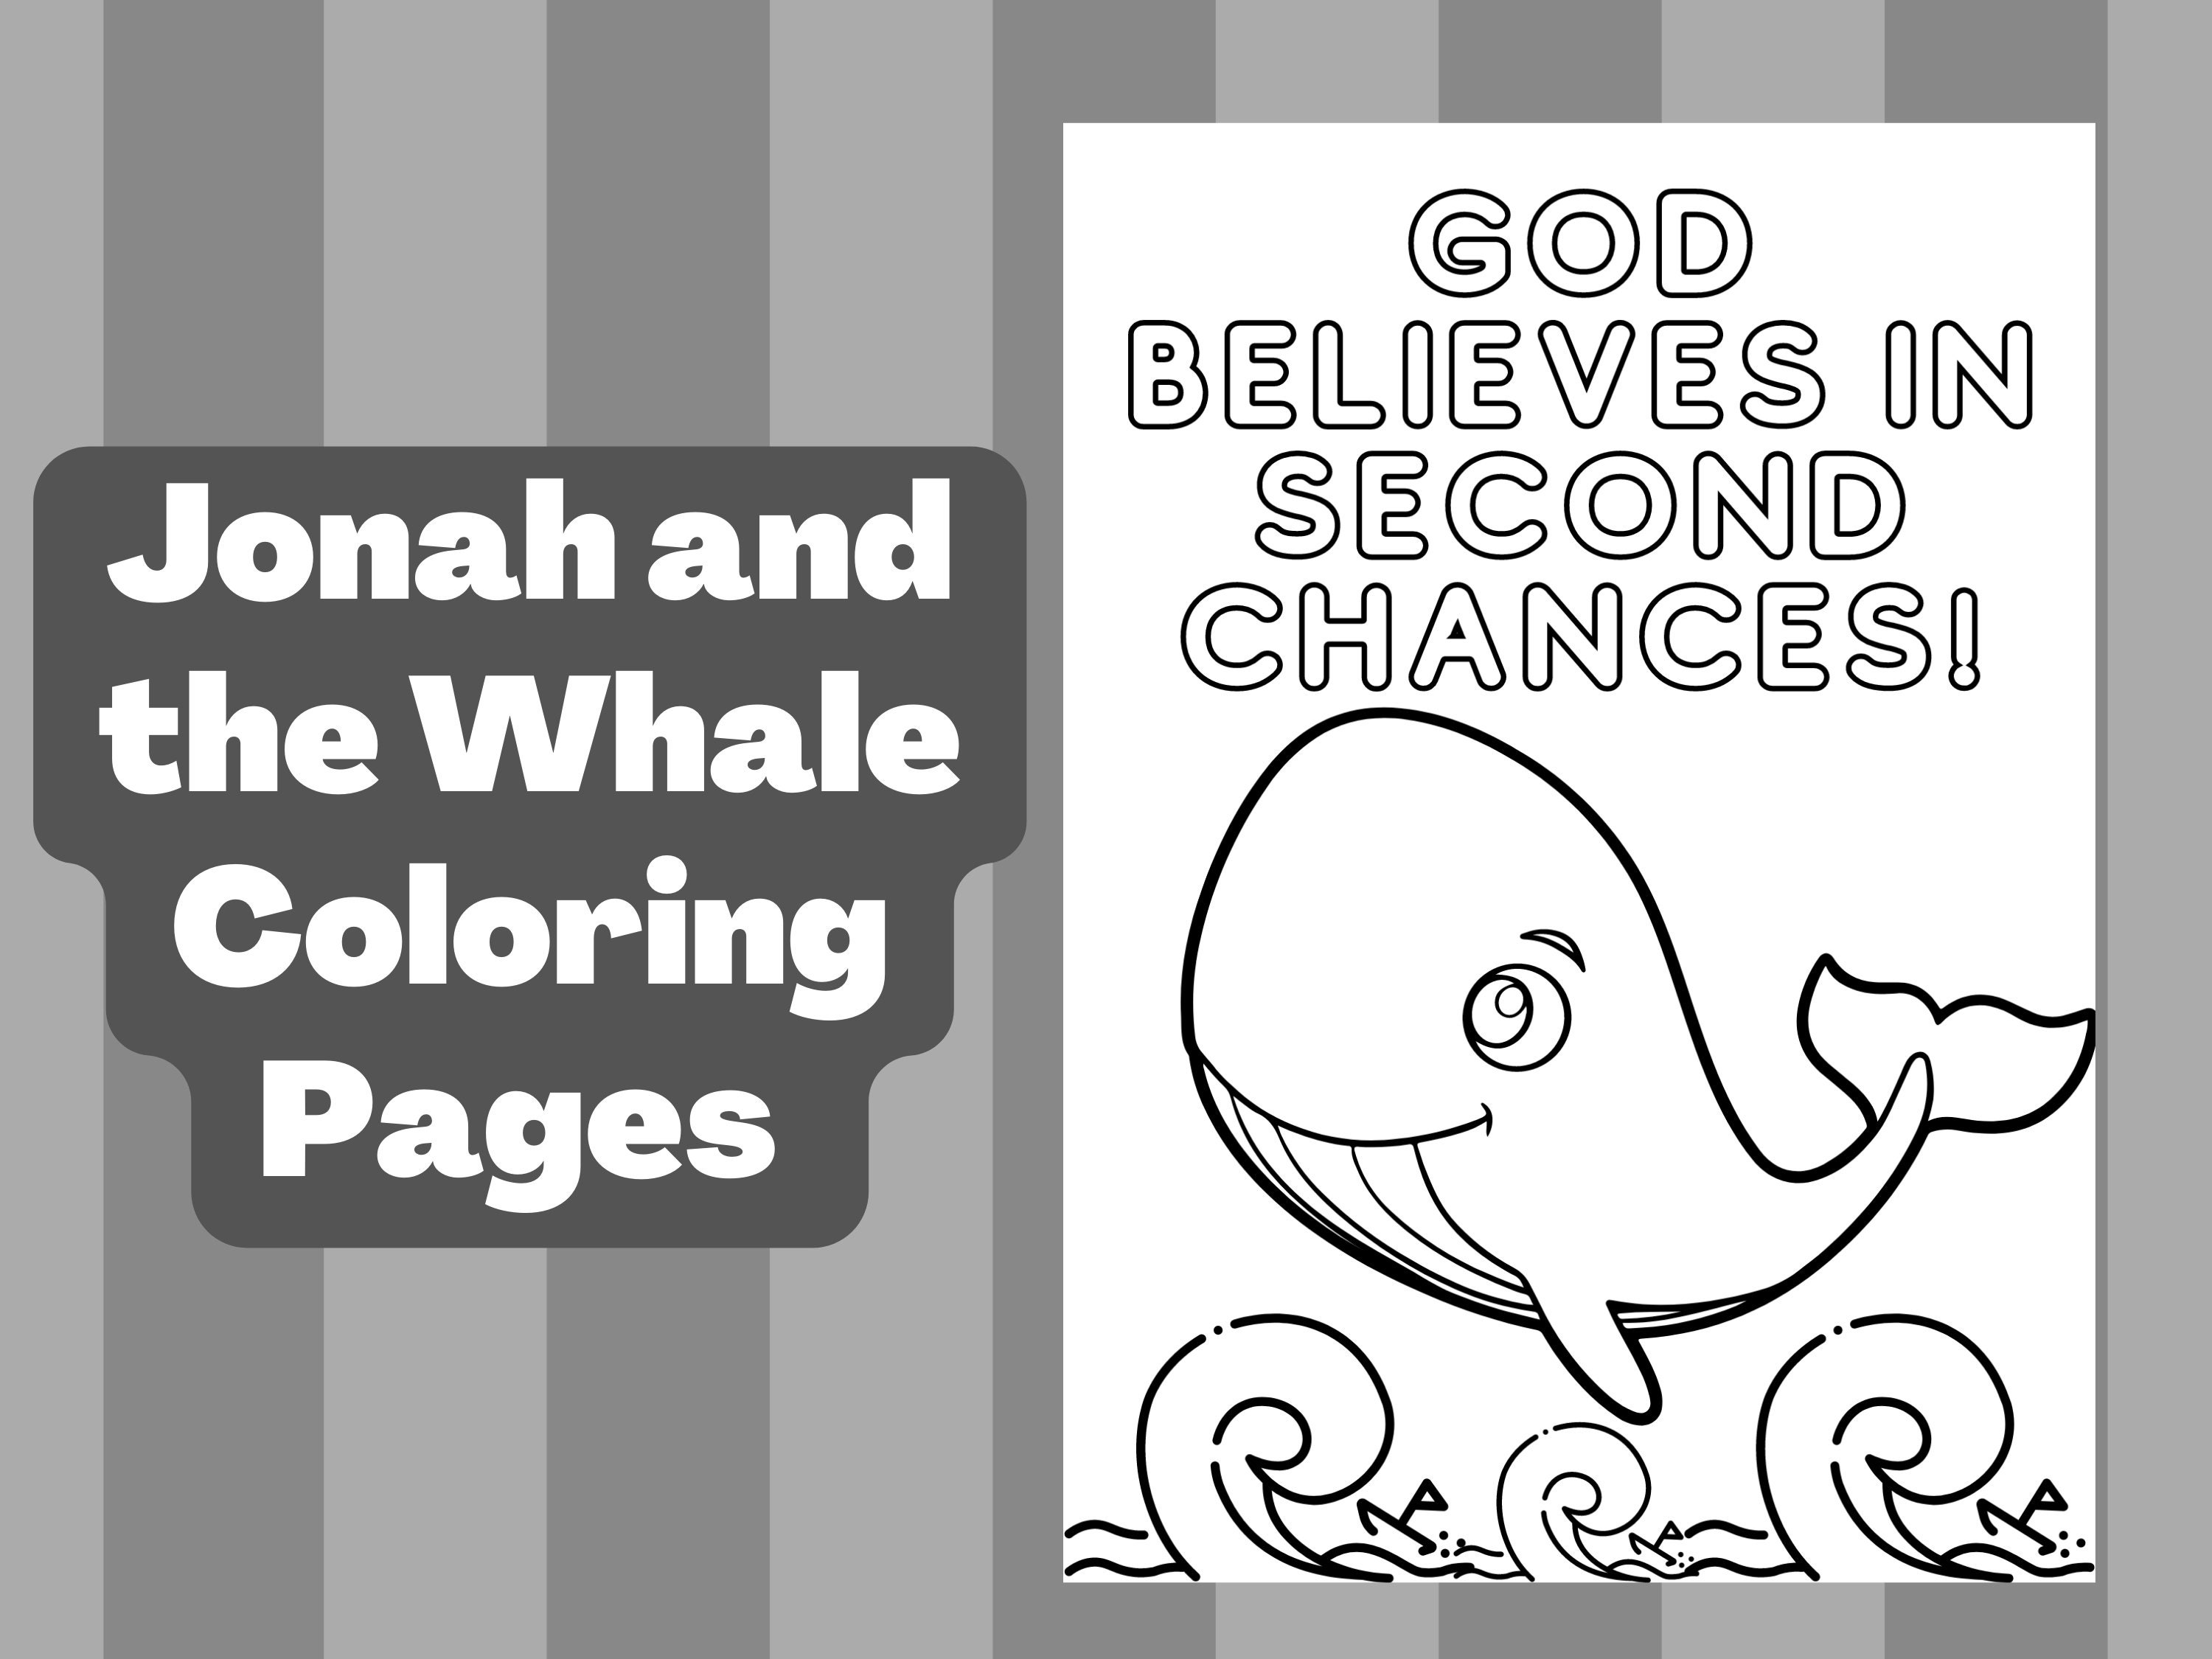 jonah-the-whale-coloring-pages